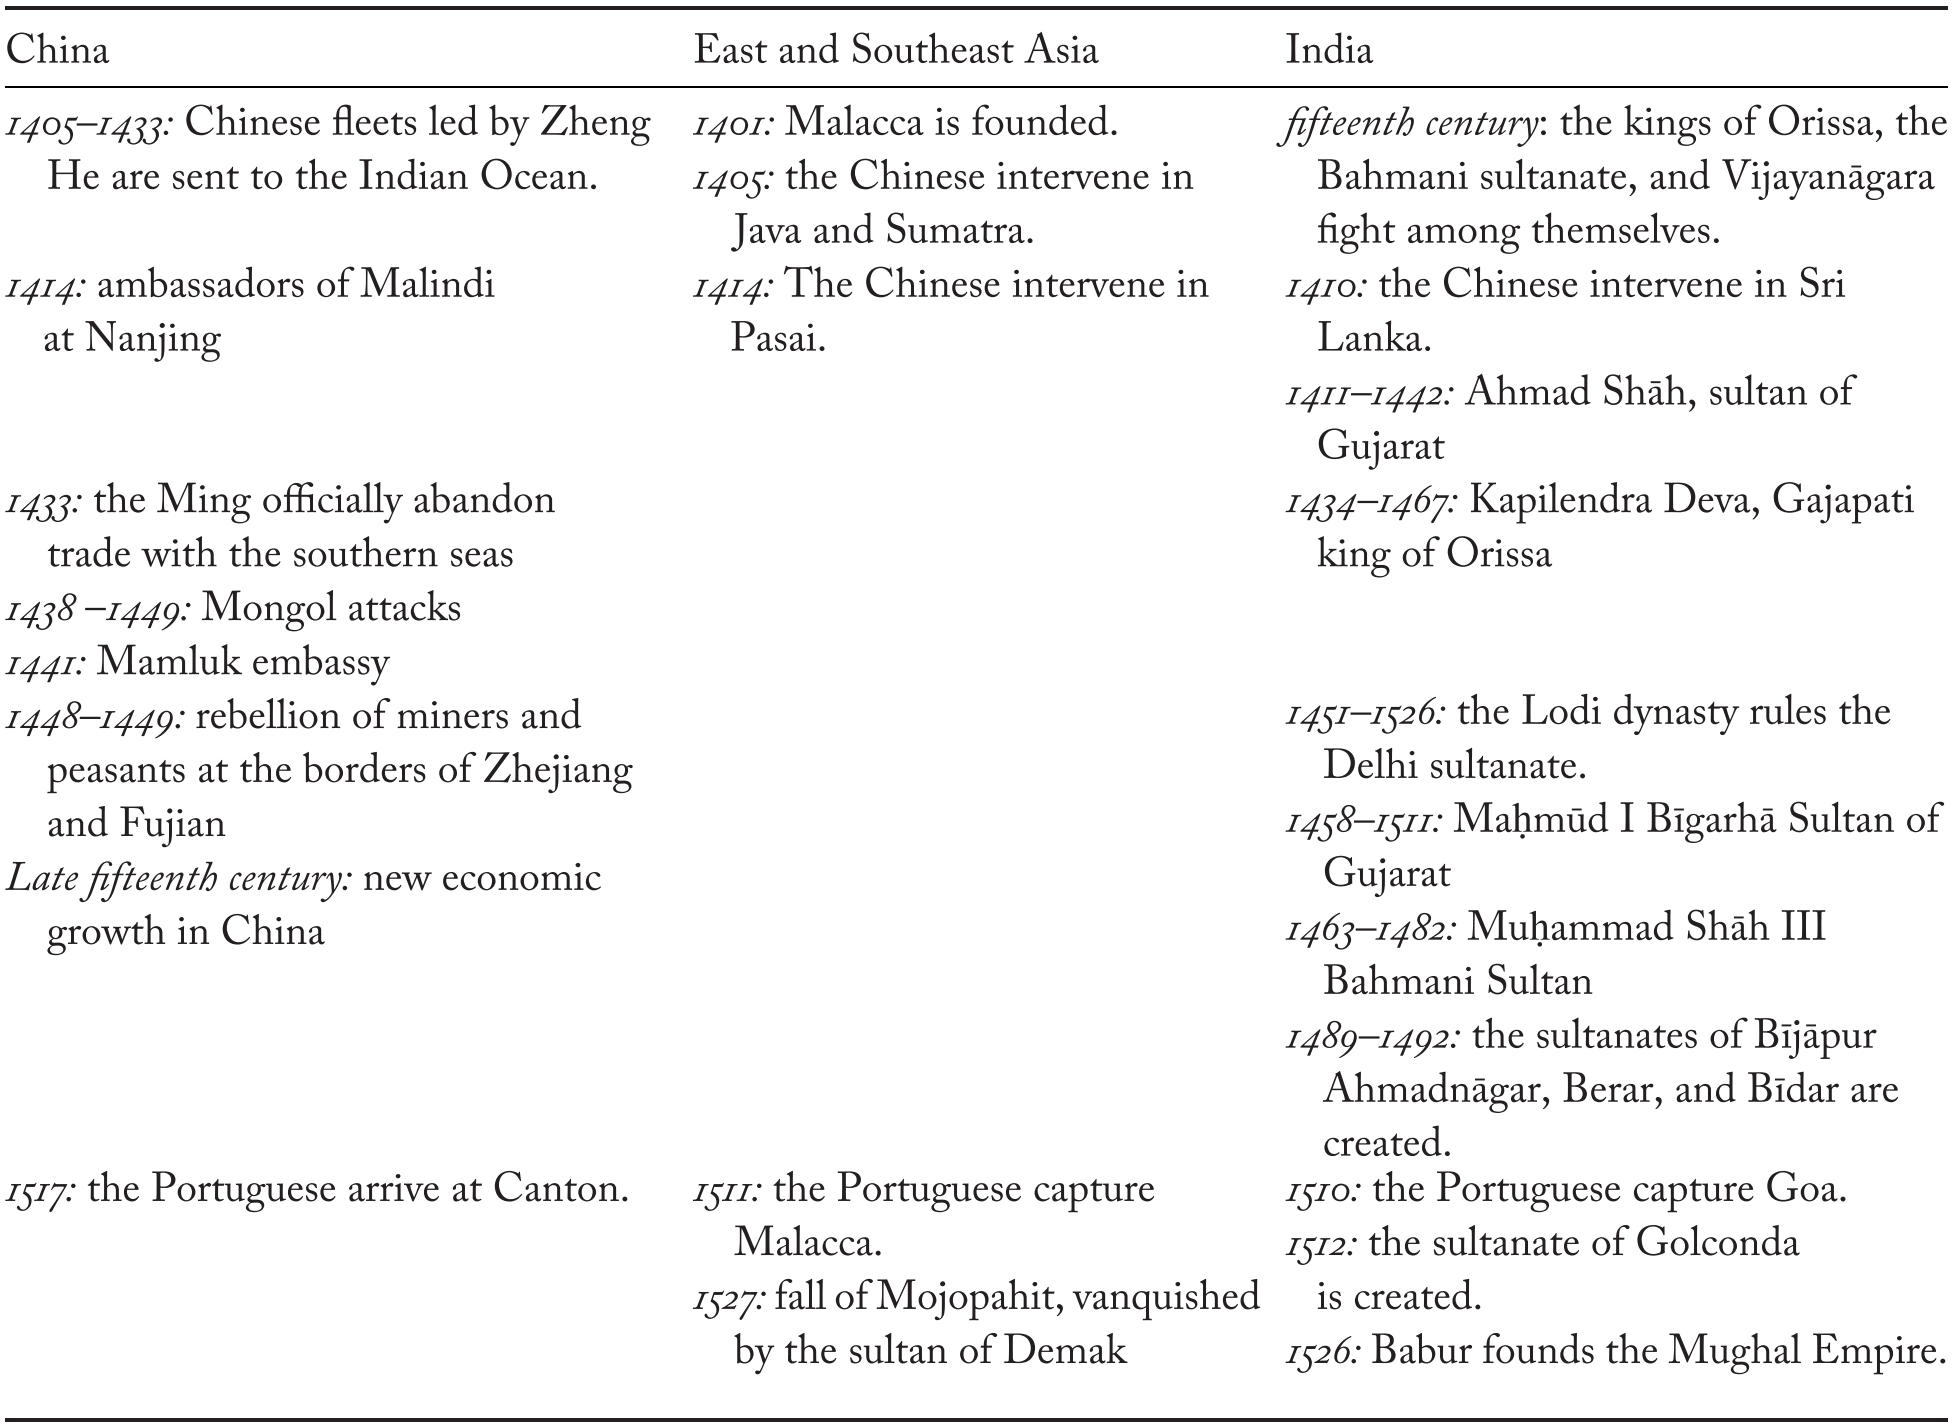 From The Globalization Of The Afro Eurasian Area To The Dawn Of European Expansion Fifteenth And Early Sixteenth Centuries Part Iii The Worlds Of The Indian Ocean